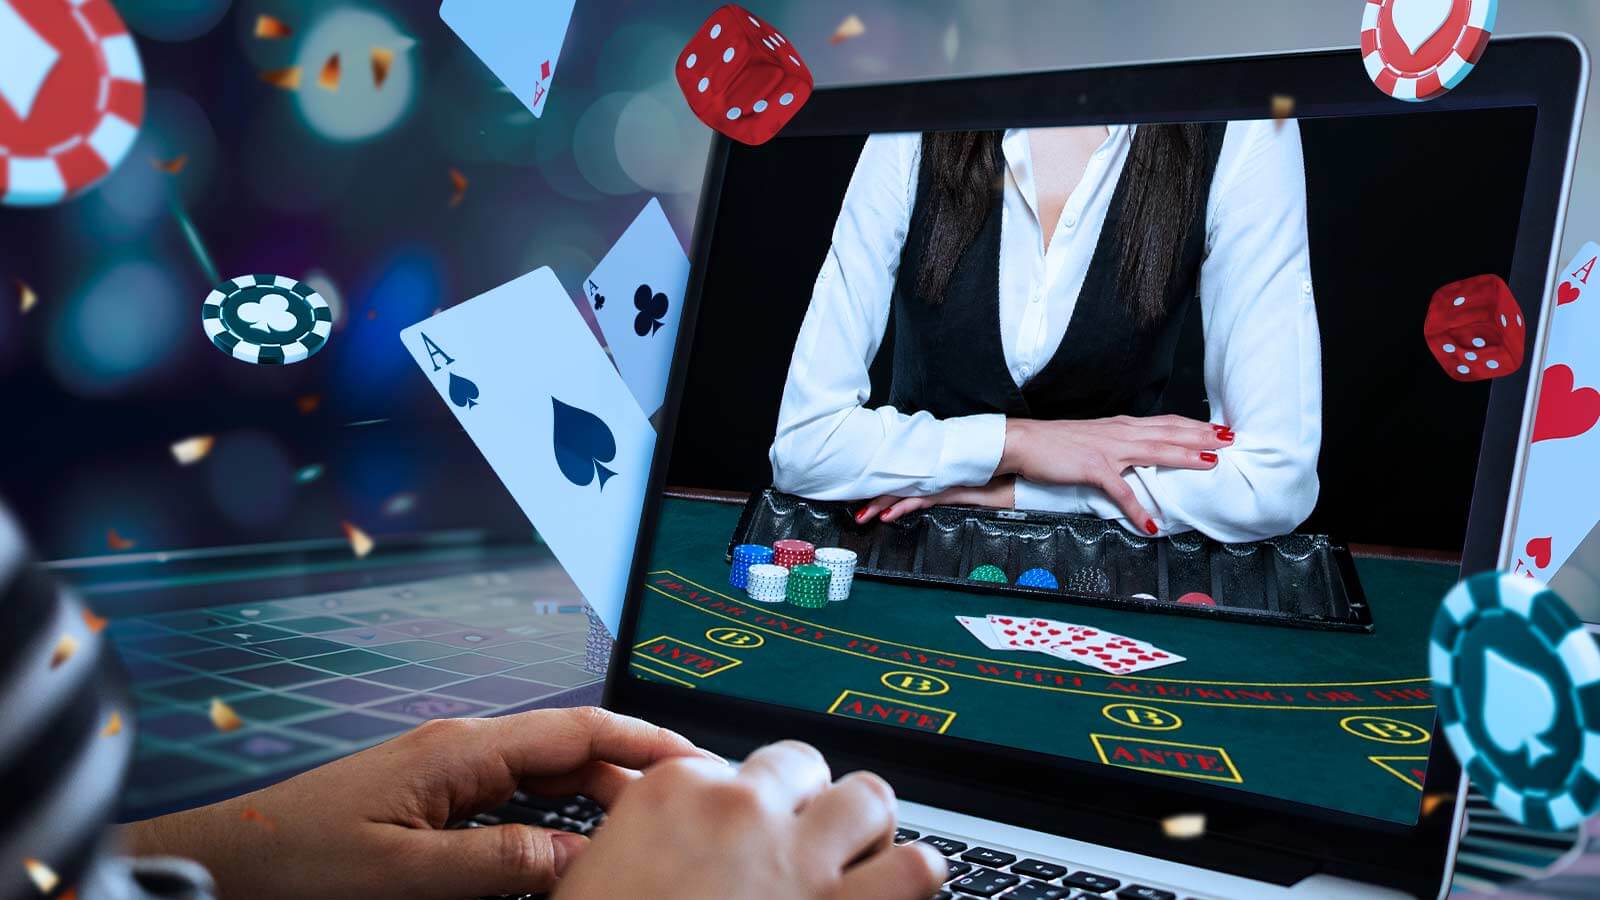 Live dealer games attract players in their prime